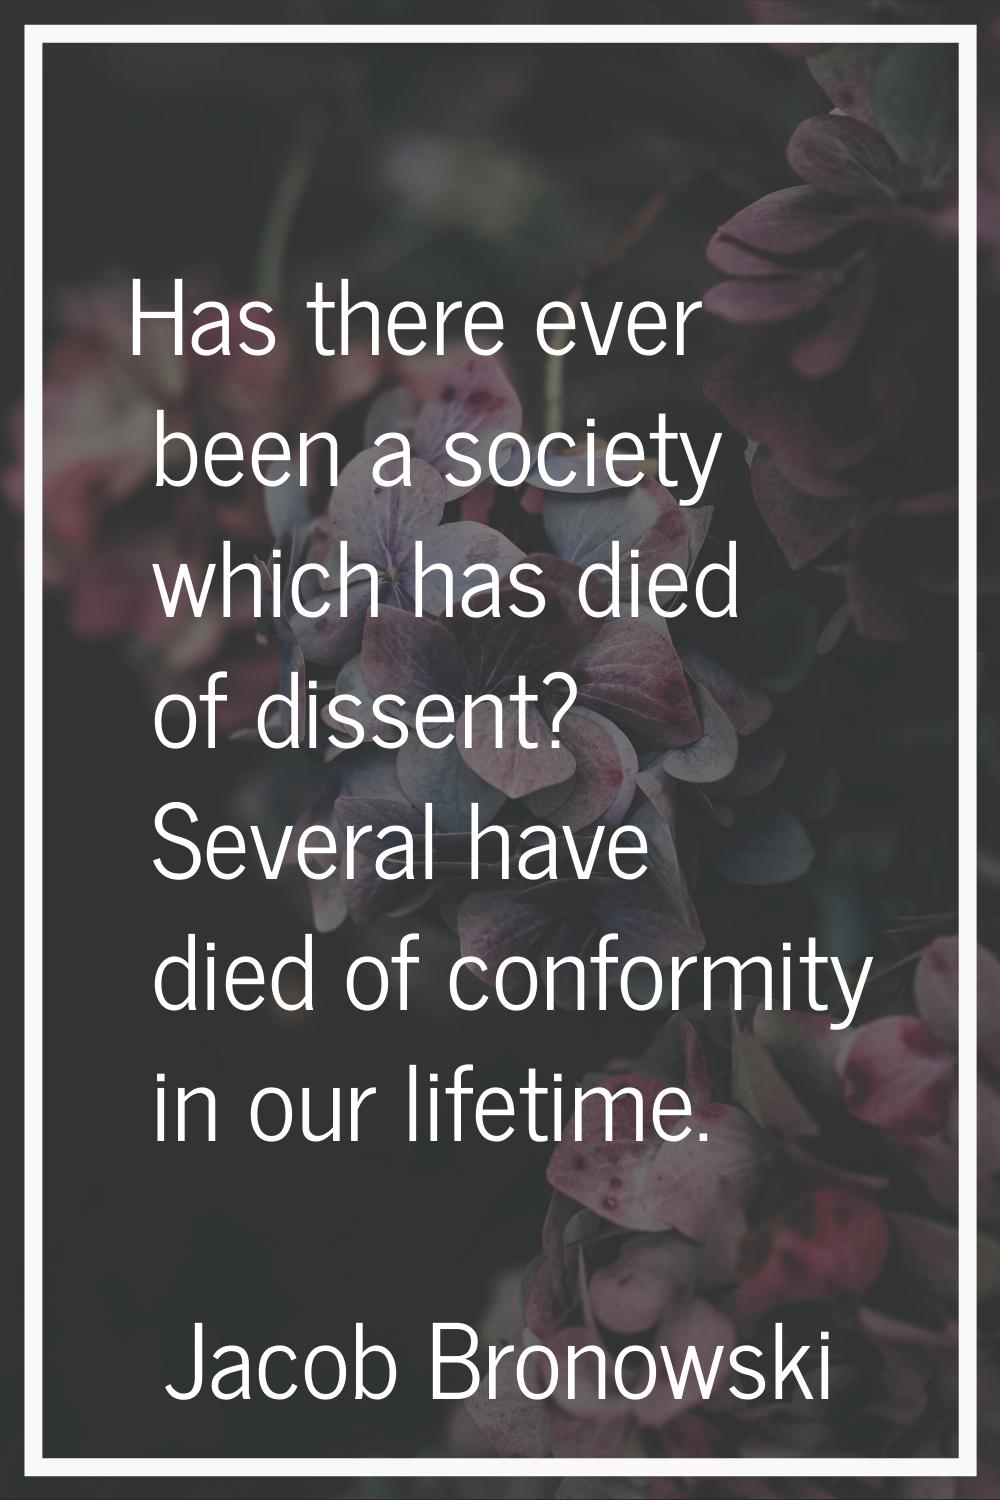 Has there ever been a society which has died of dissent? Several have died of conformity in our lif